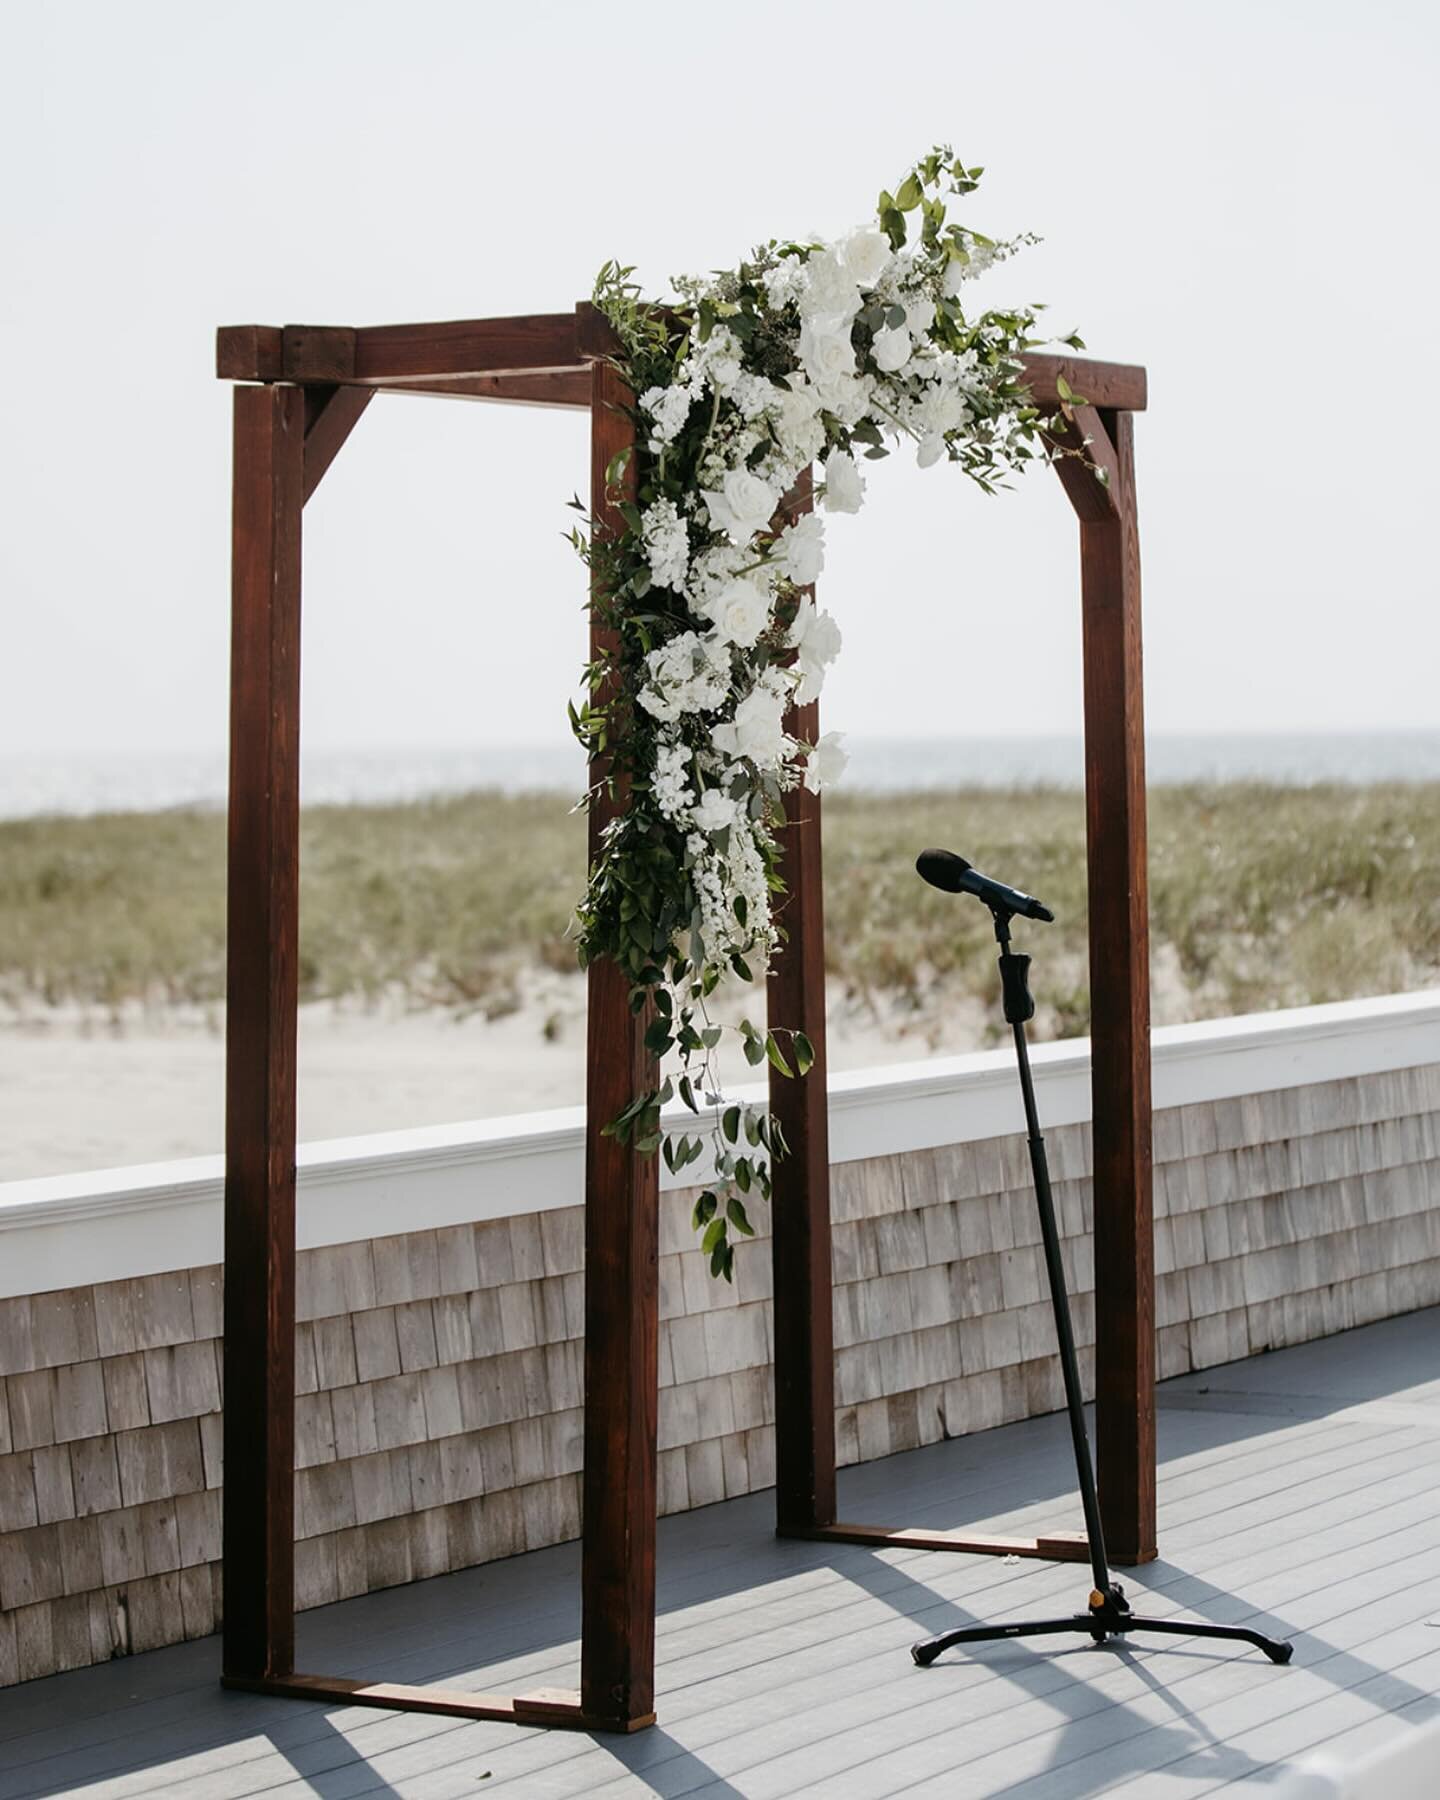 With a view like that, sometimes the sea calls for simplicity.

Photography @the_gowans 
Florals @whitebirchfloral 
Venue @wychmereevents 

#wychmerebeachclub #capecod #wedding #ceremony #florist #weddingvenue #capecodweddings #weddingphotography #we